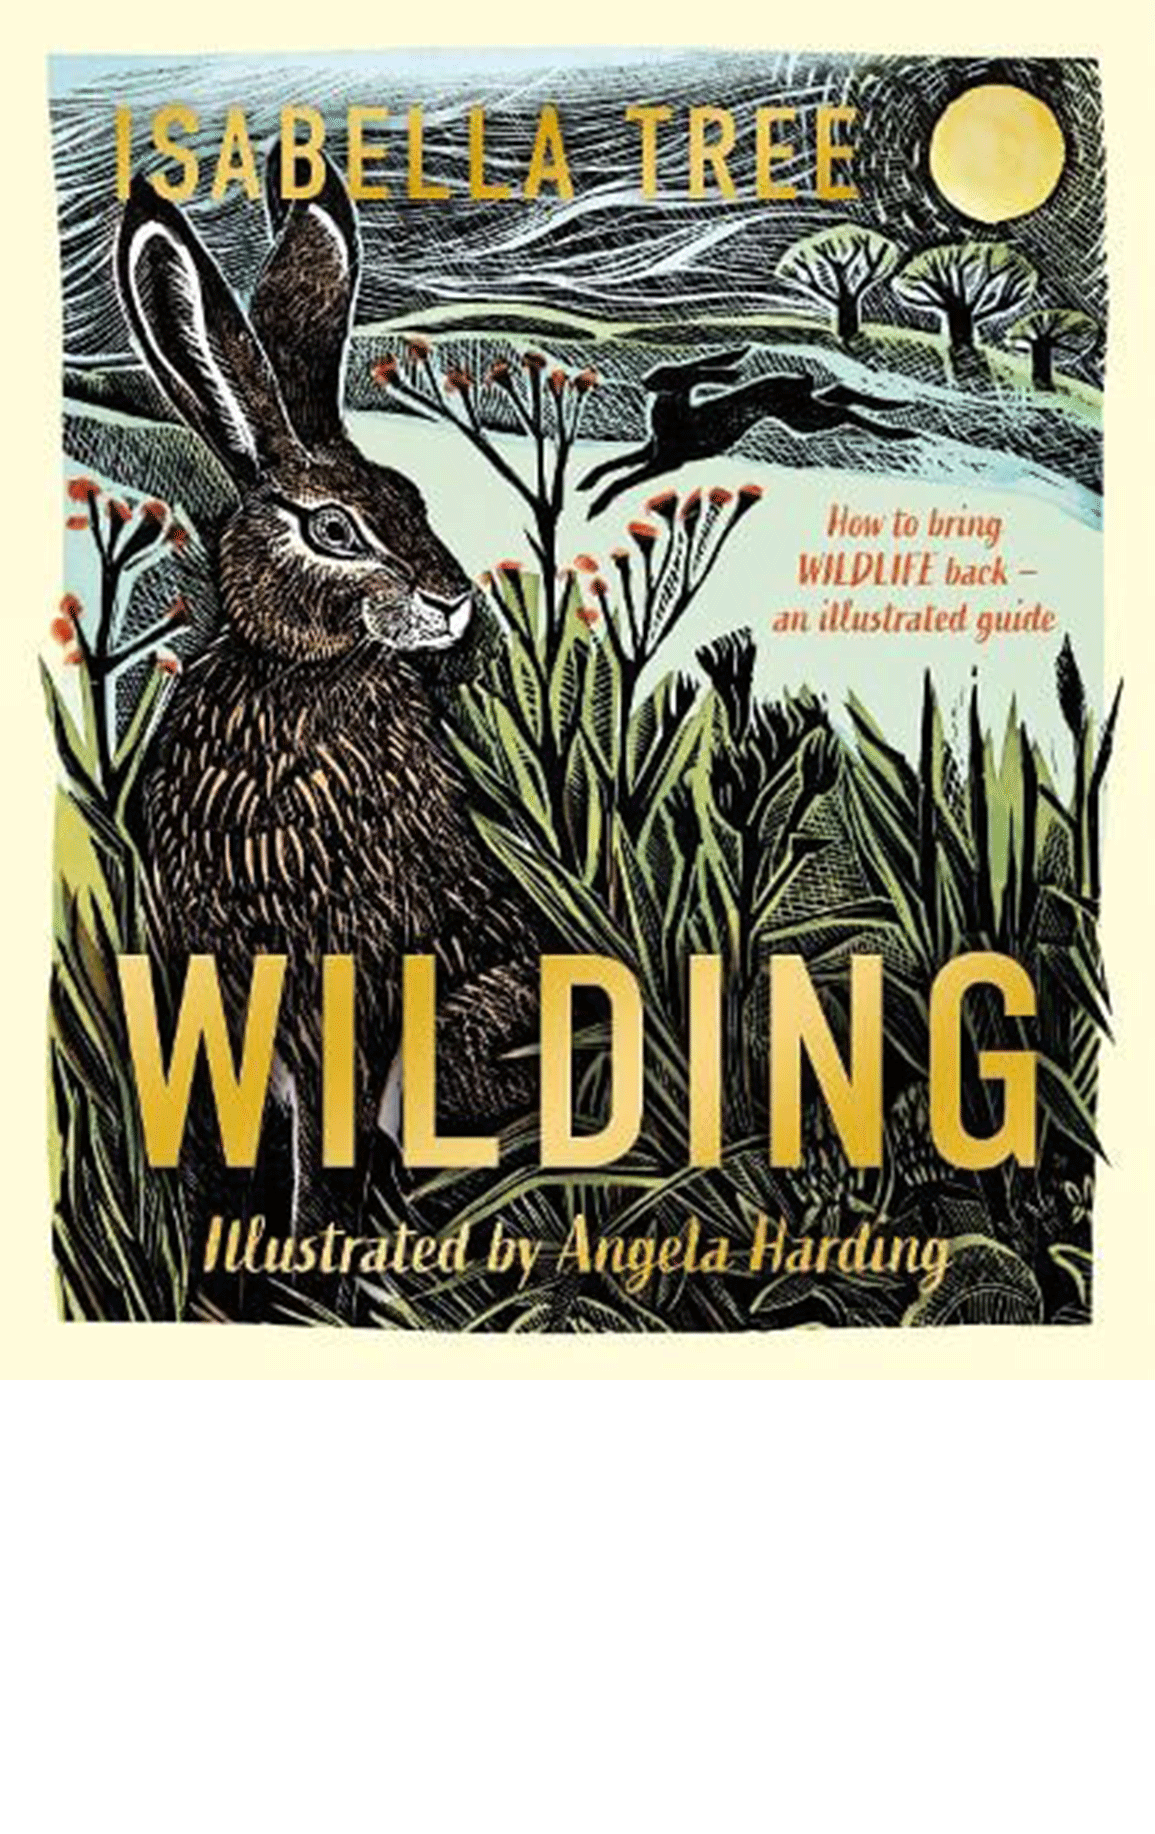 Book jacket for Isabella Tree book called Wilding